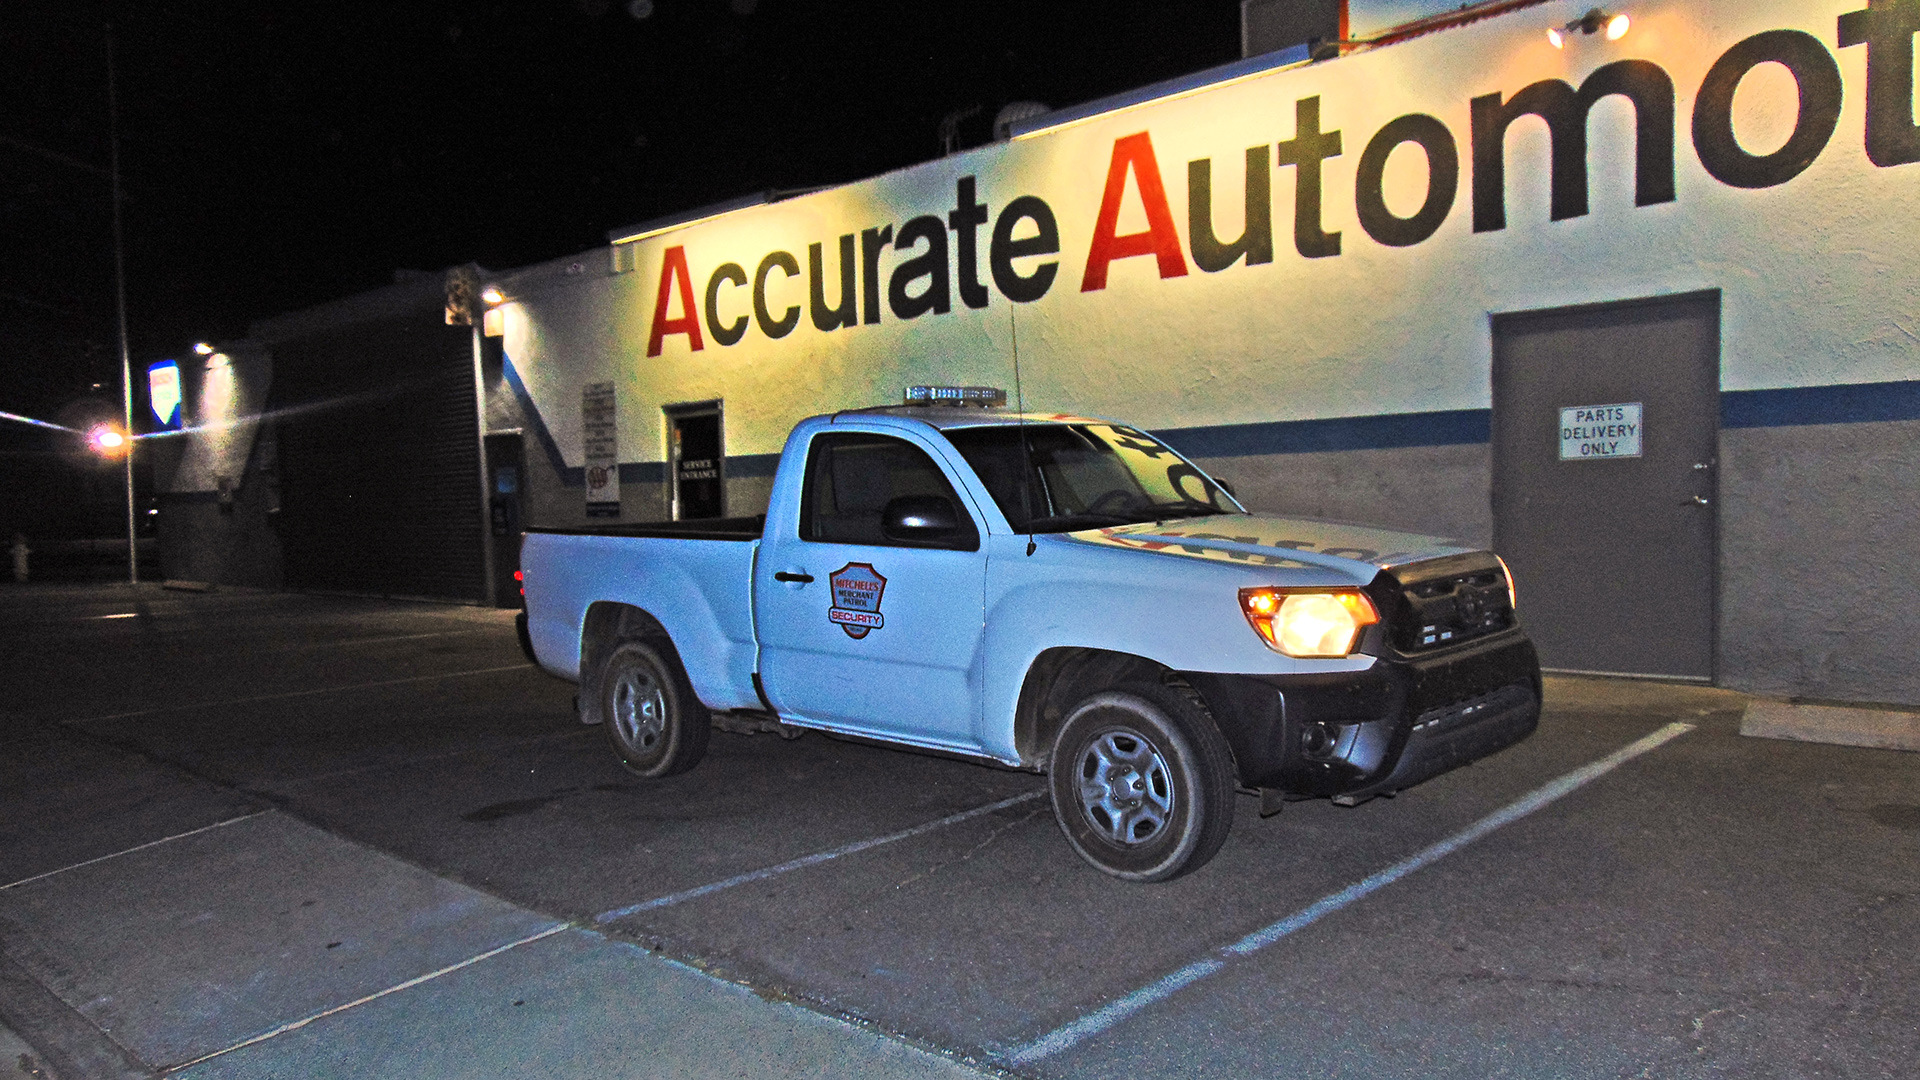 Providing security services for Accurate Automotive